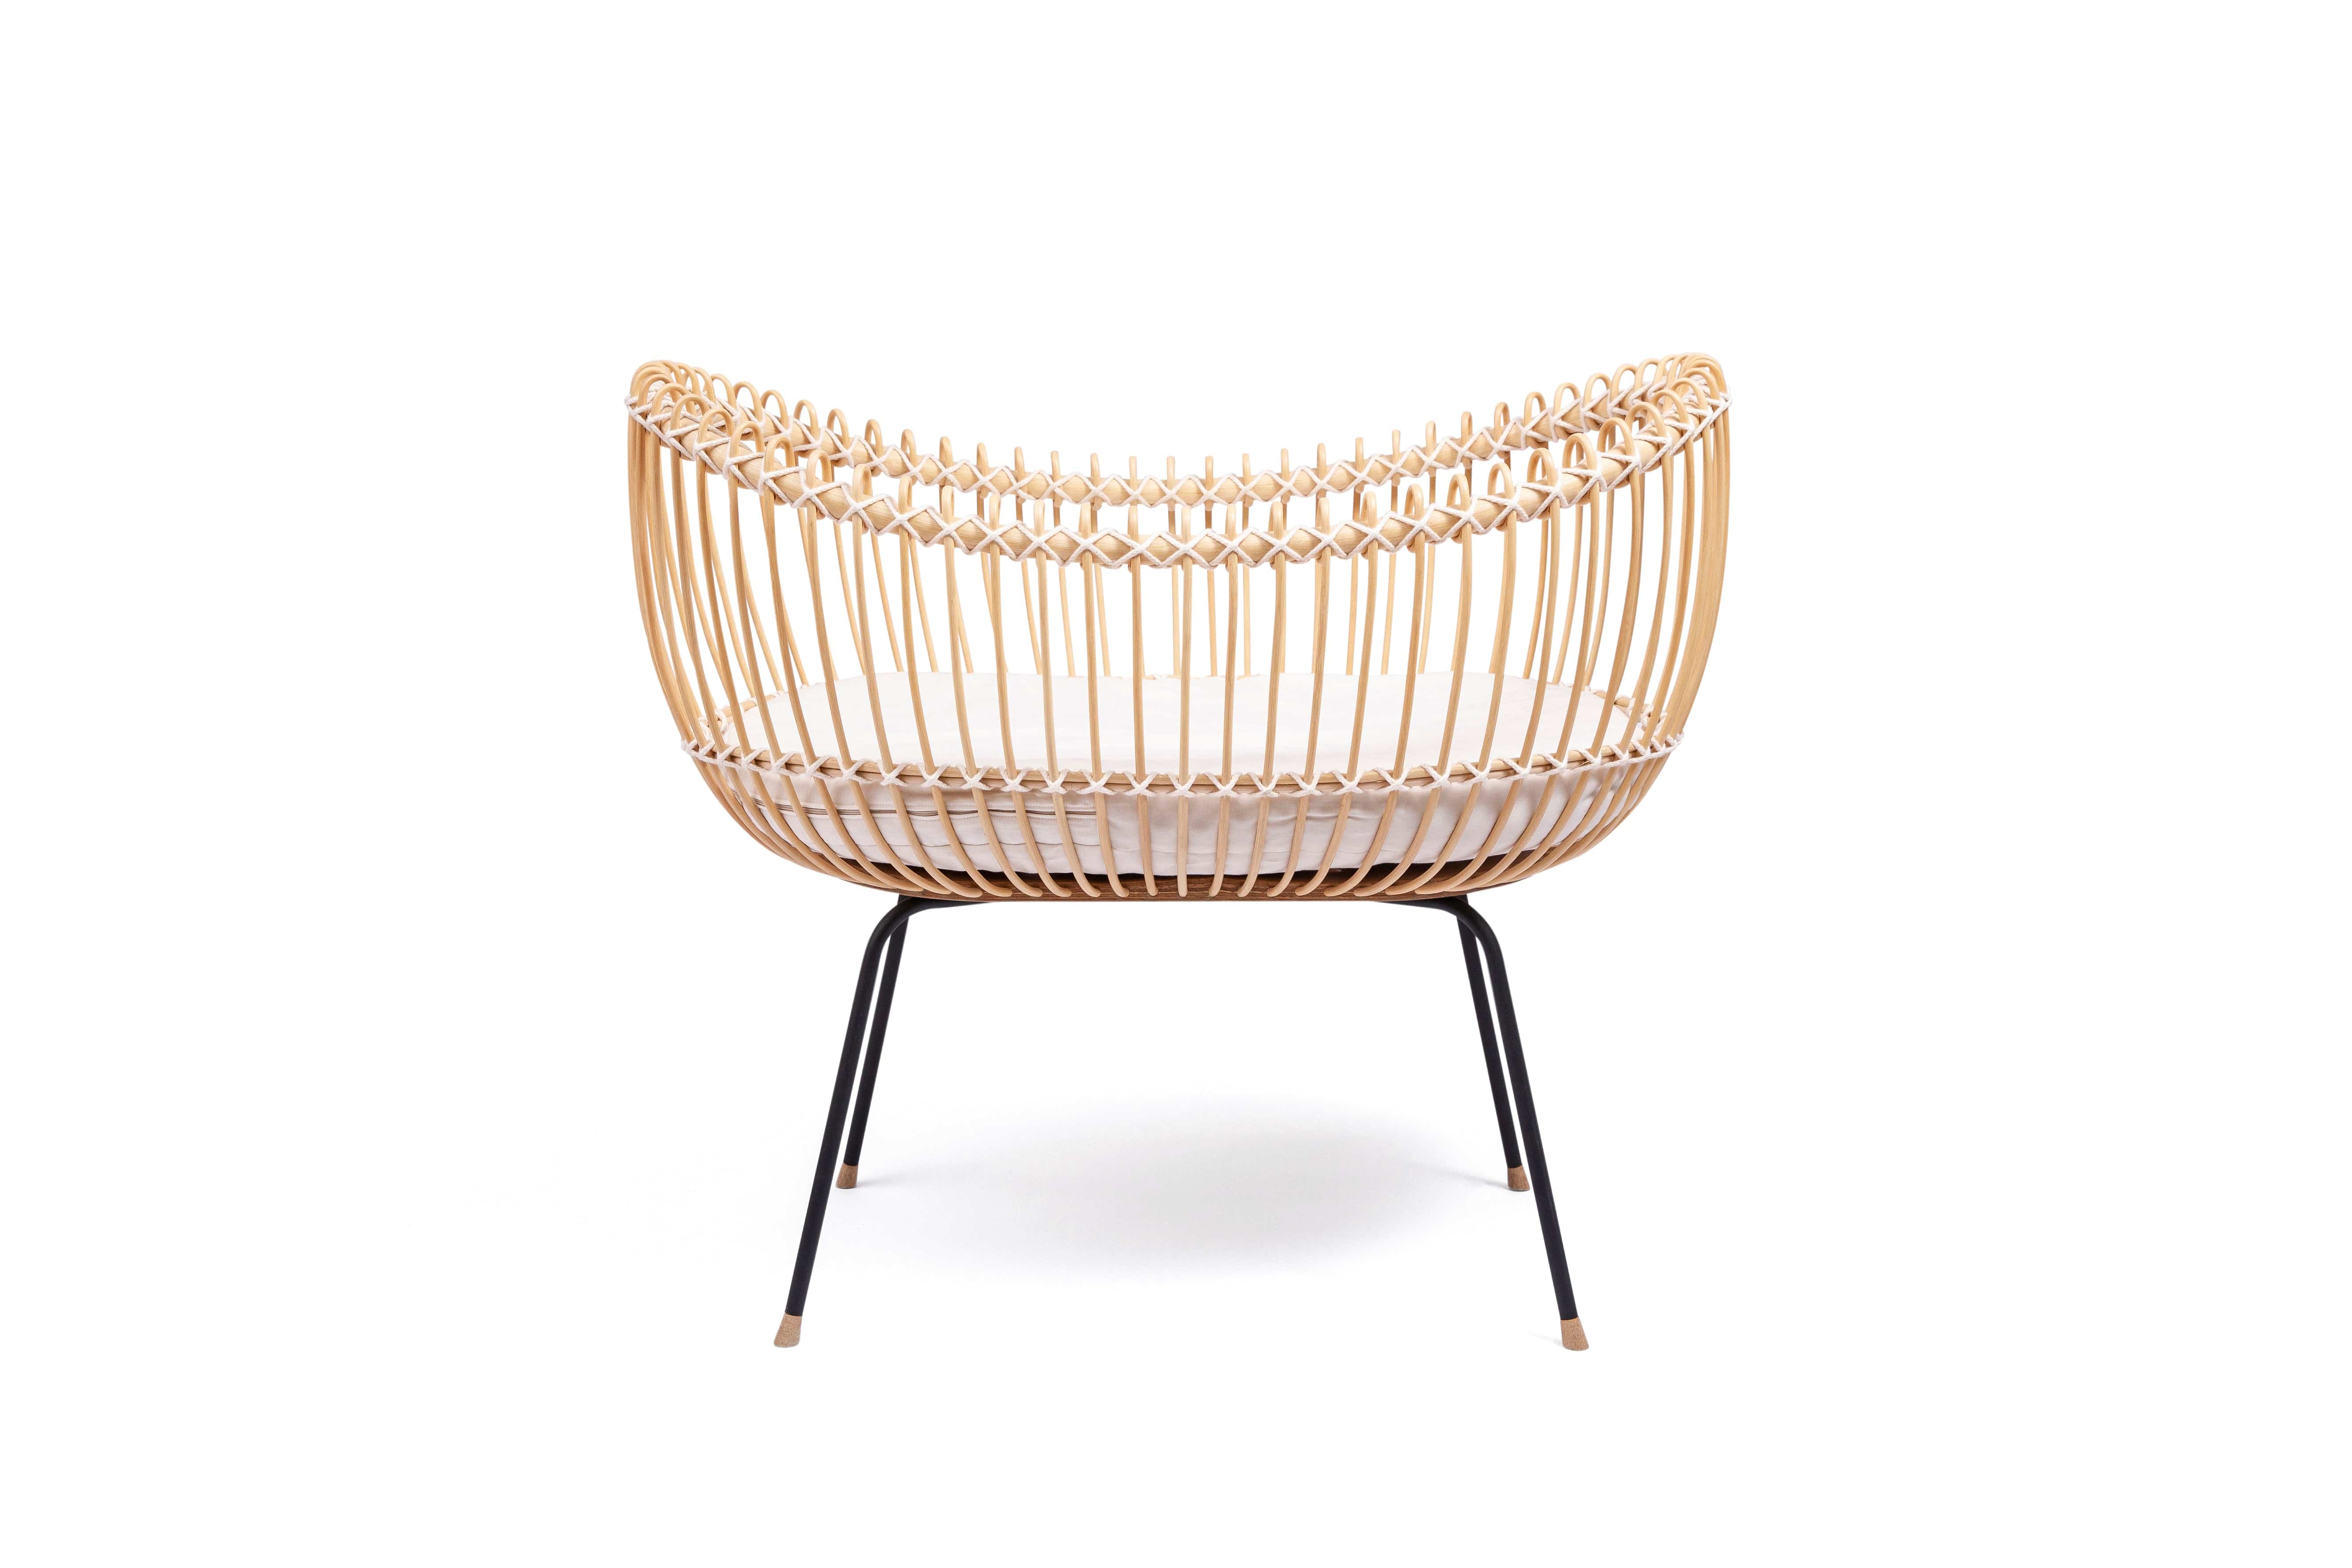 Round crib with outwards curved basket. Made of woven, light beige rattan beams, connected with off-white cotton strings and standing on slim black metal legs. 